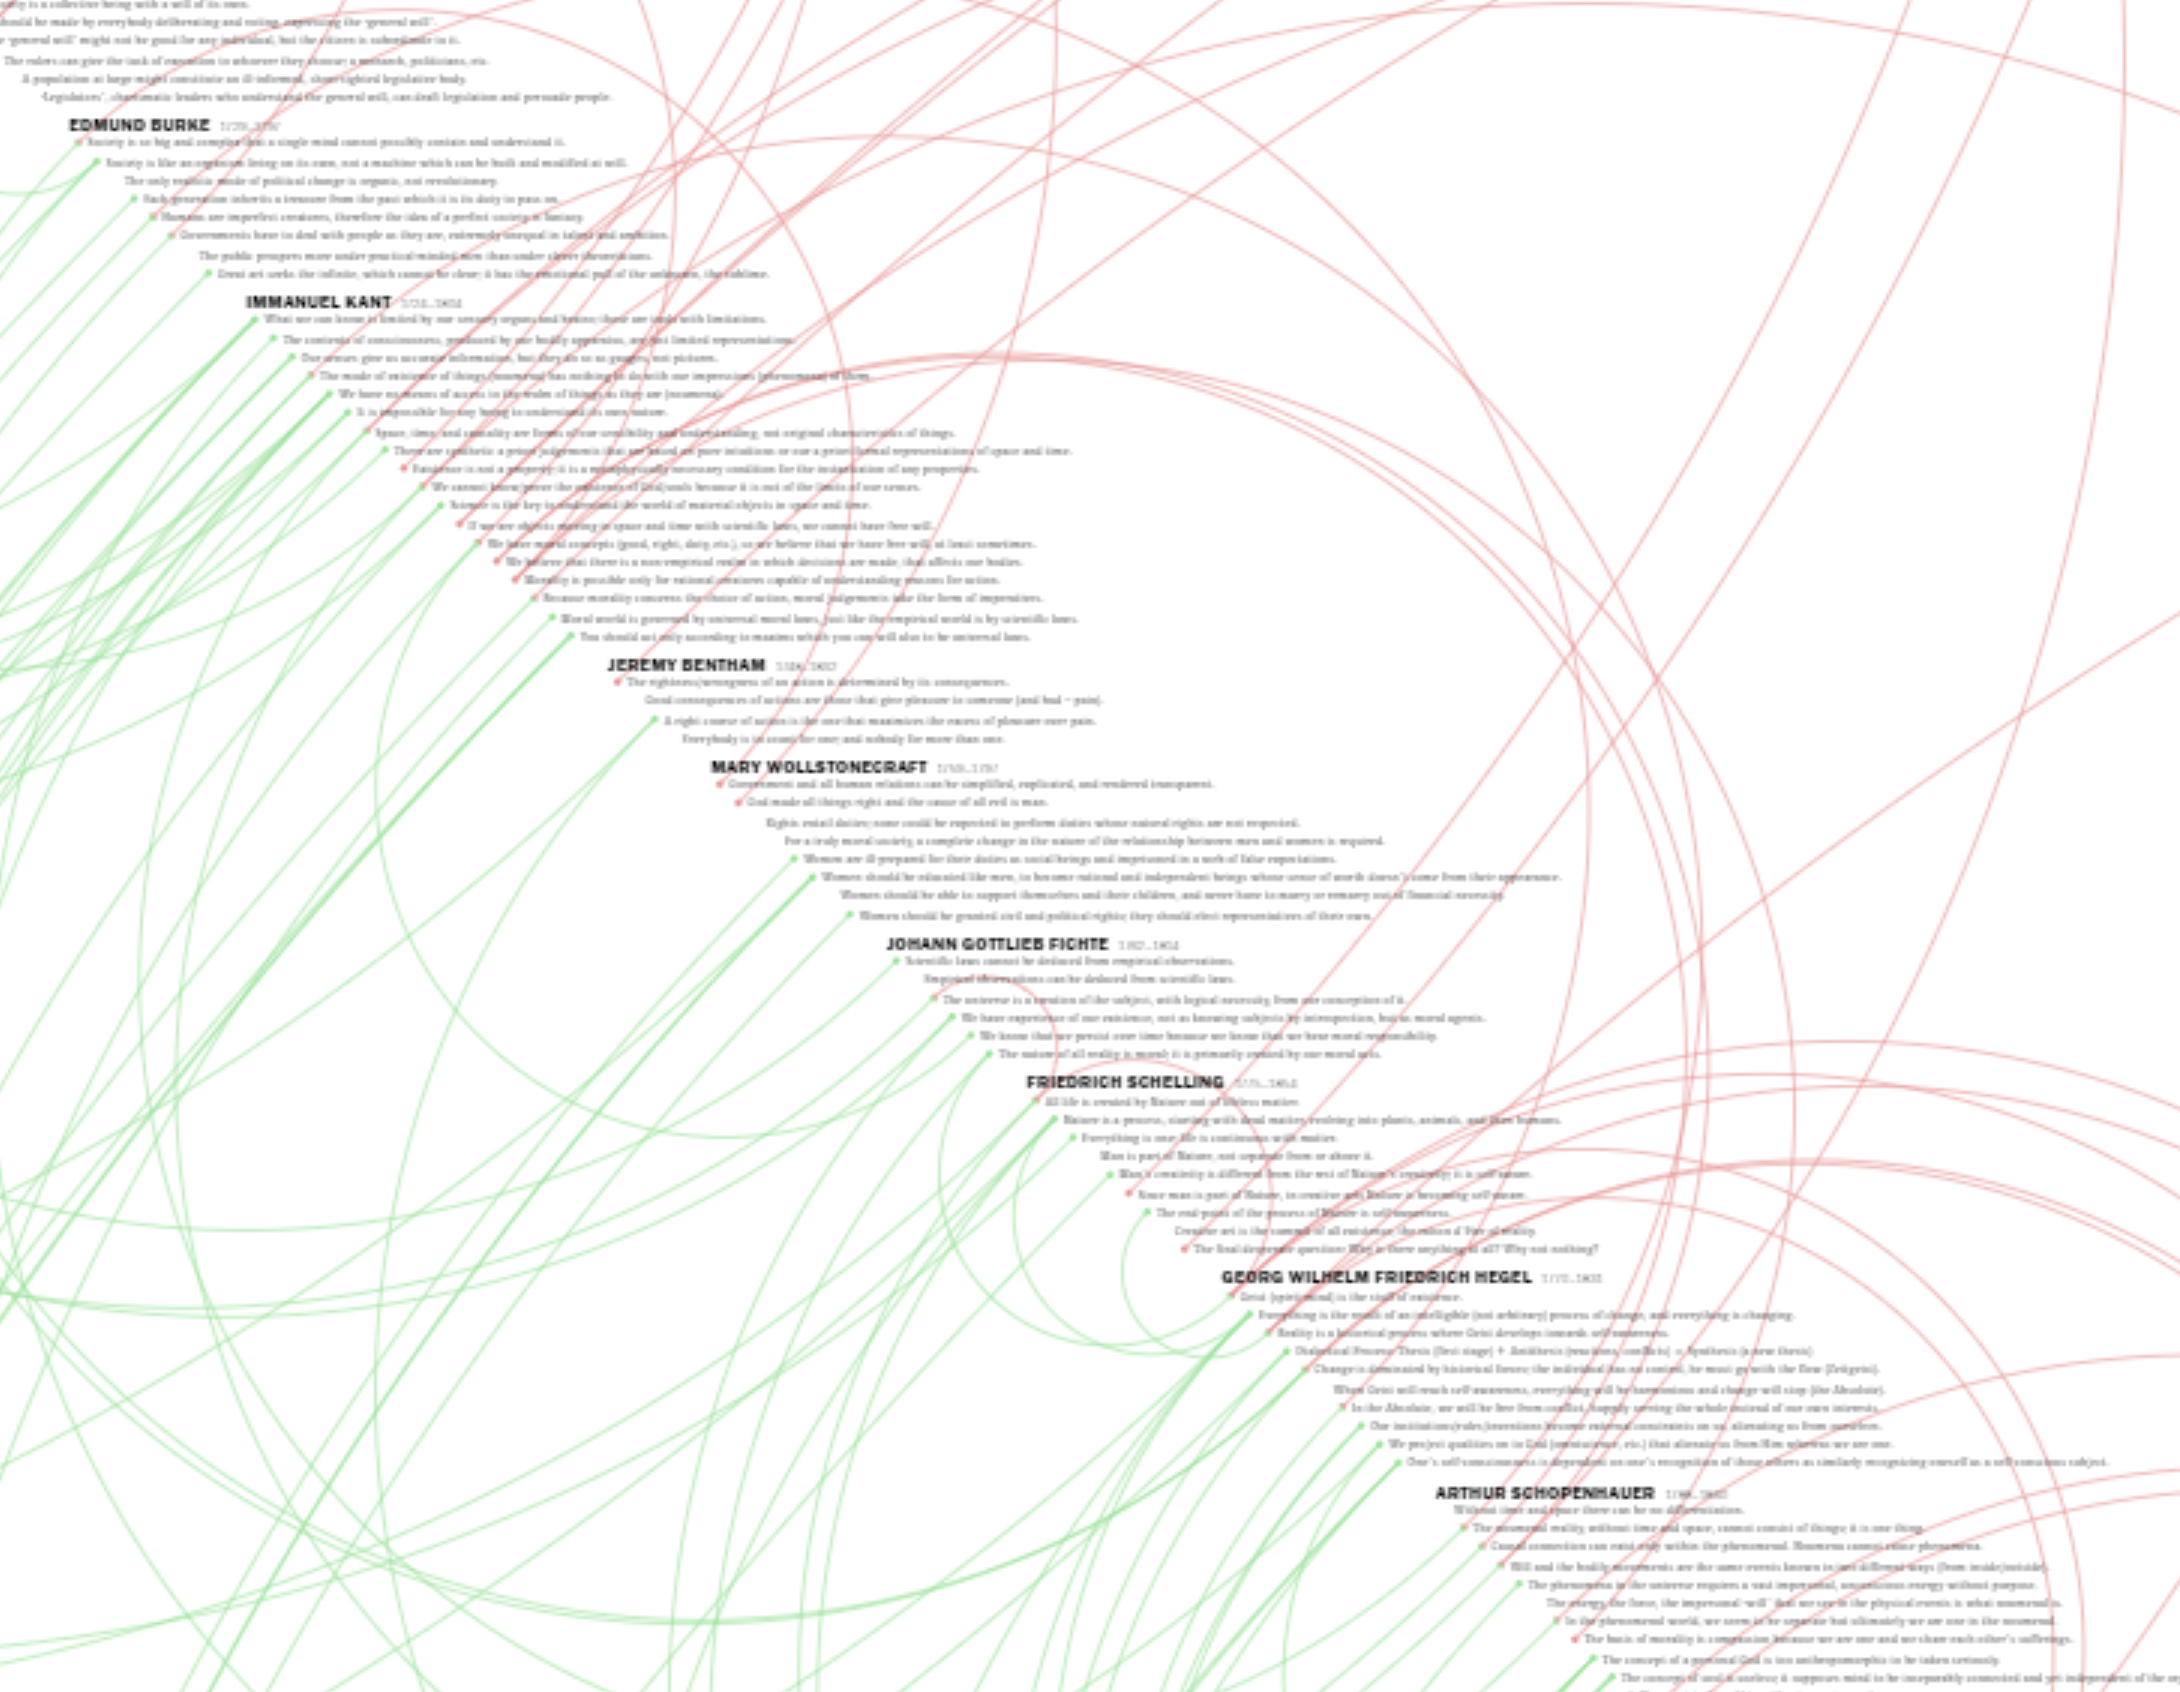 Gorgeous Interactive Timeline of Philosophical Ideas - Daily Nous